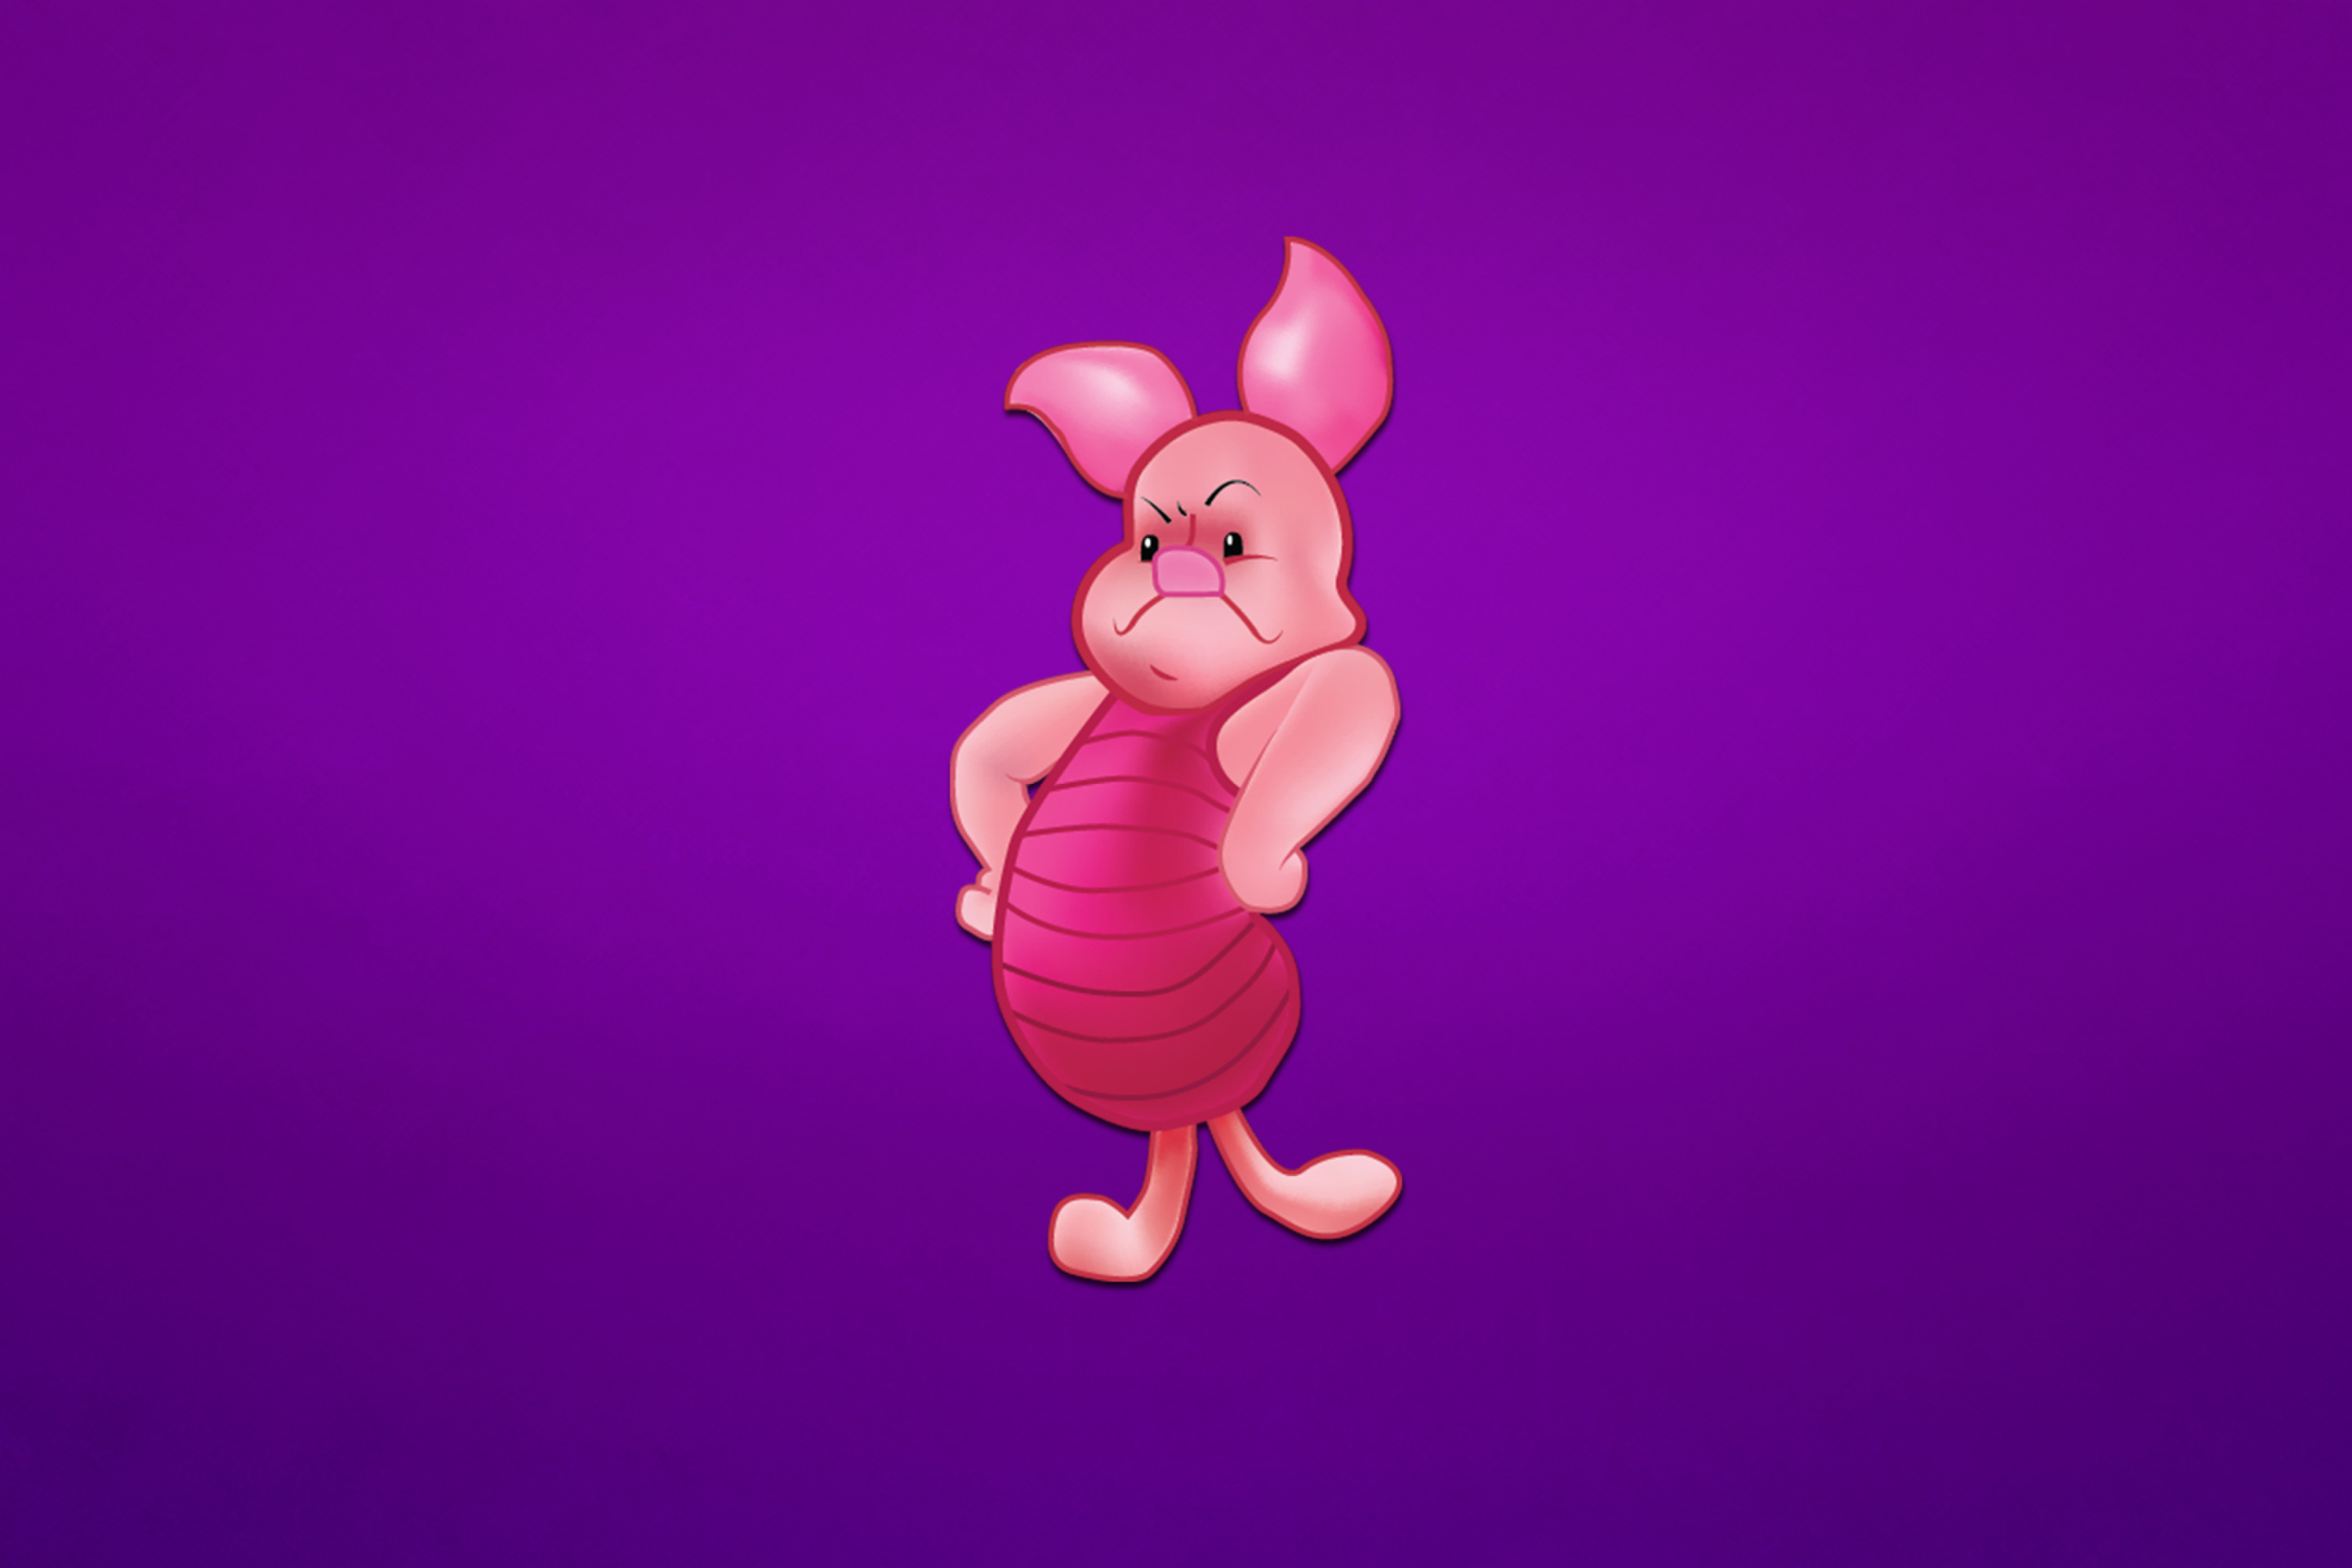 Angry Piglet wallpaper 2880x1920